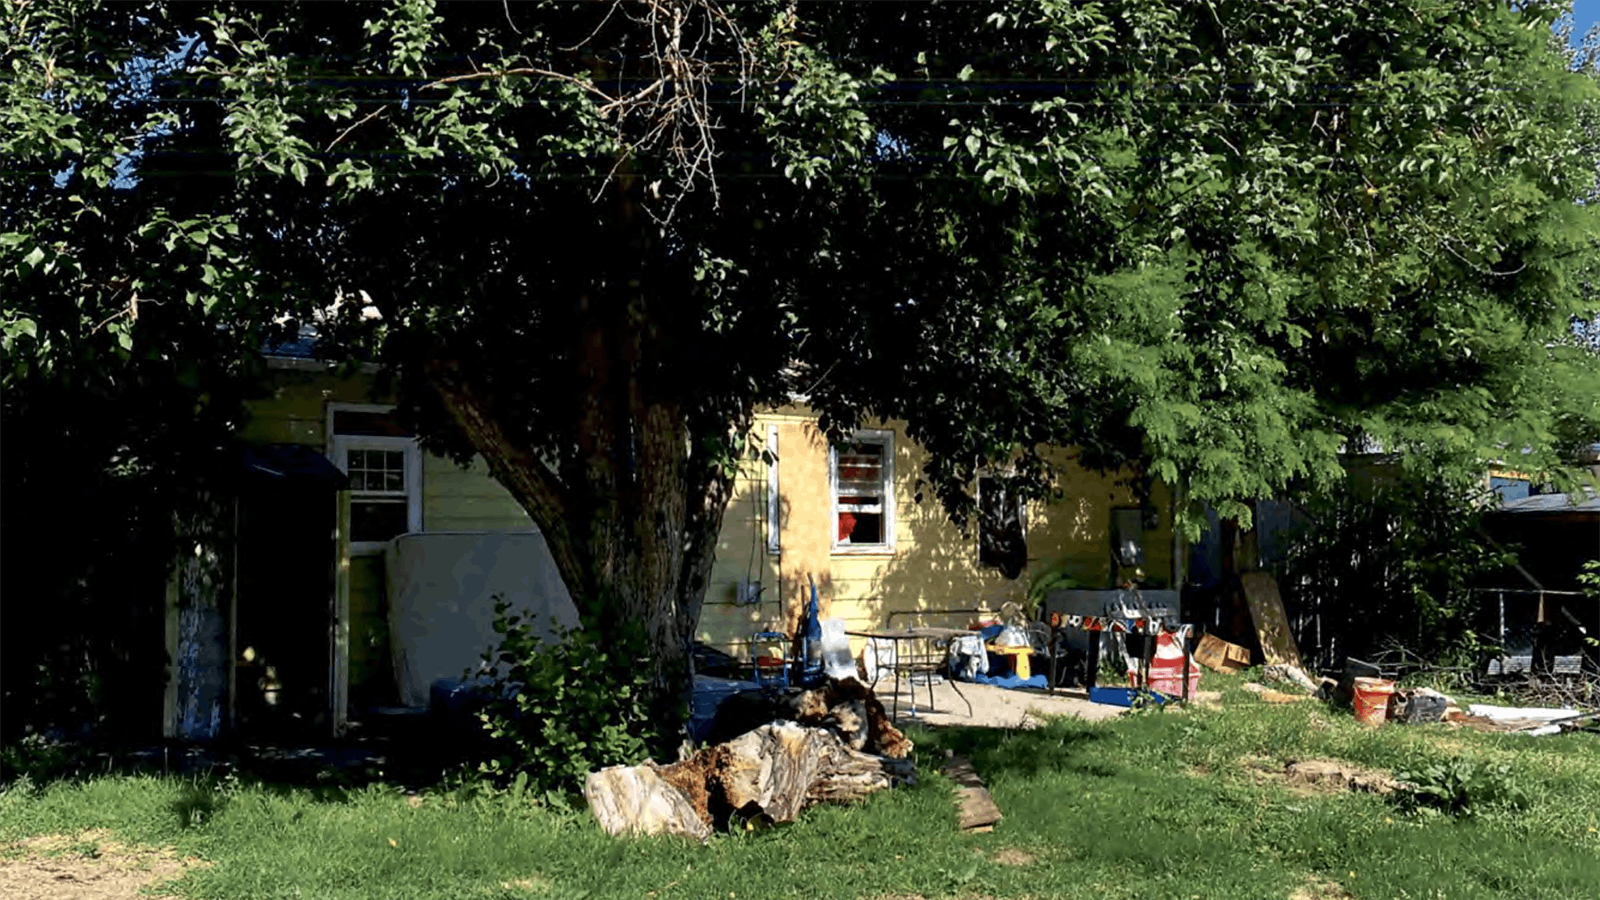 The backyard of the former drug house was full of garbage and junk.